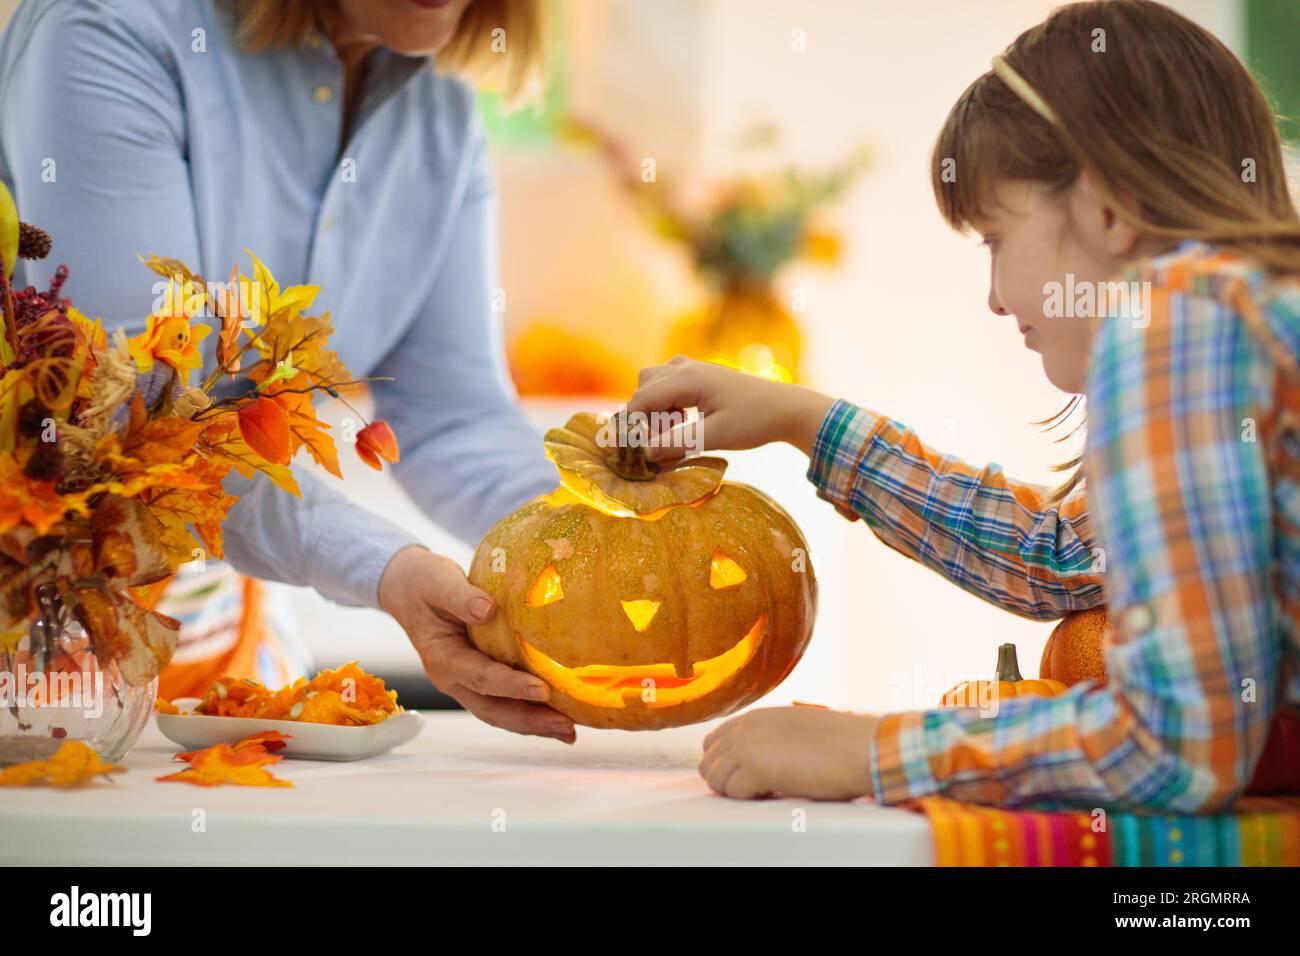 Family carving pumpkin for Halloween celebration. Woman and little girl cutting jack o lantern for traditional trick or treat decoration. Stock Photo